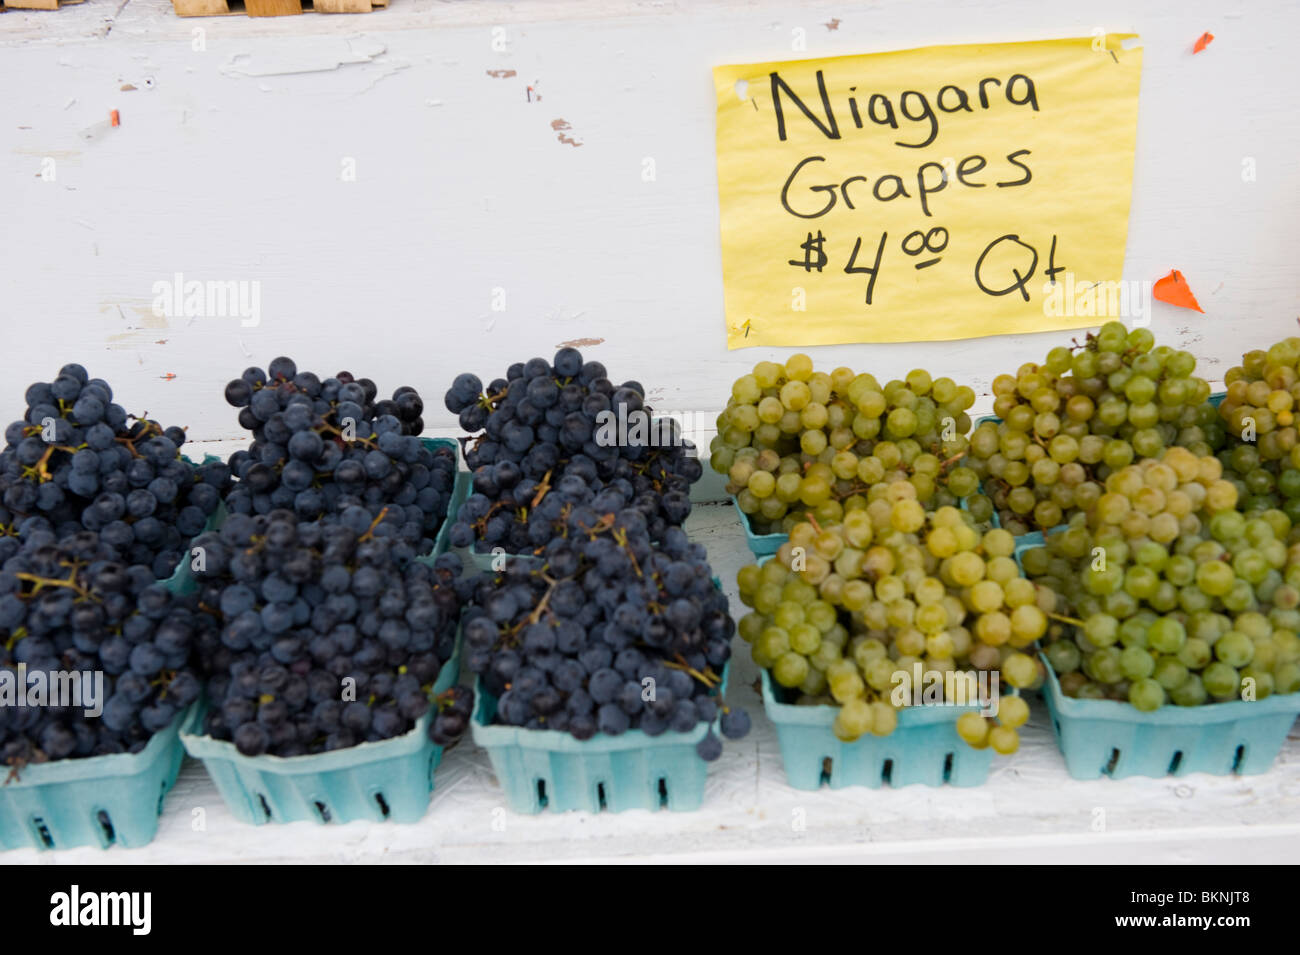 Grapes for sale at Roadside Stand in Finger Lakes Region New York Stock Photo